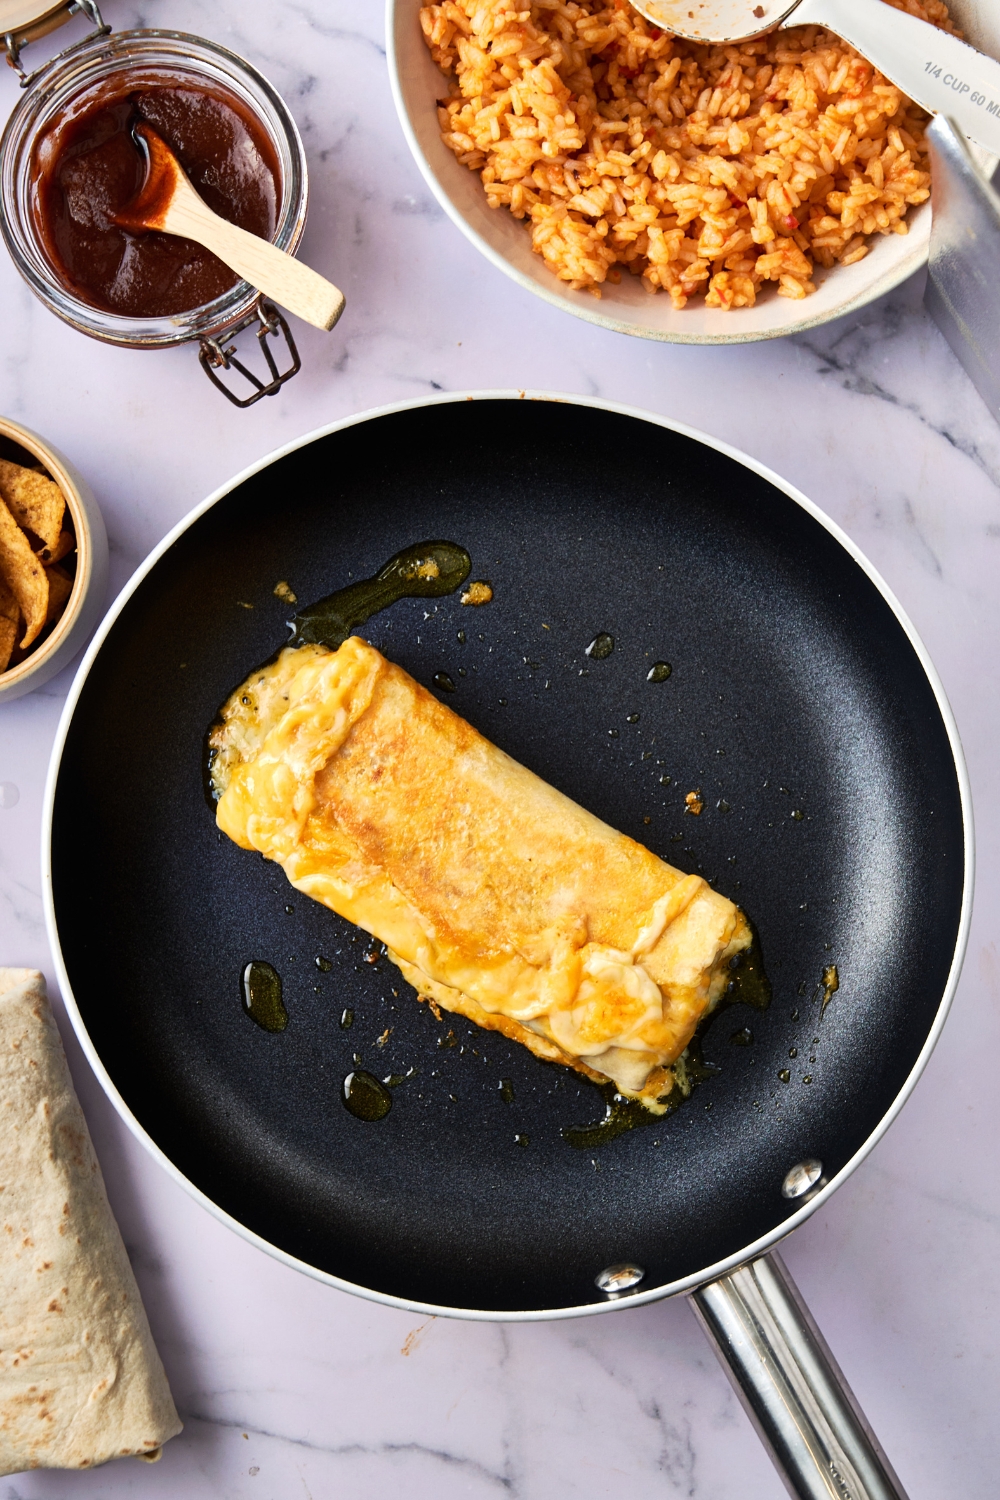 A frying pan holds a burrito covered in melted cheese.